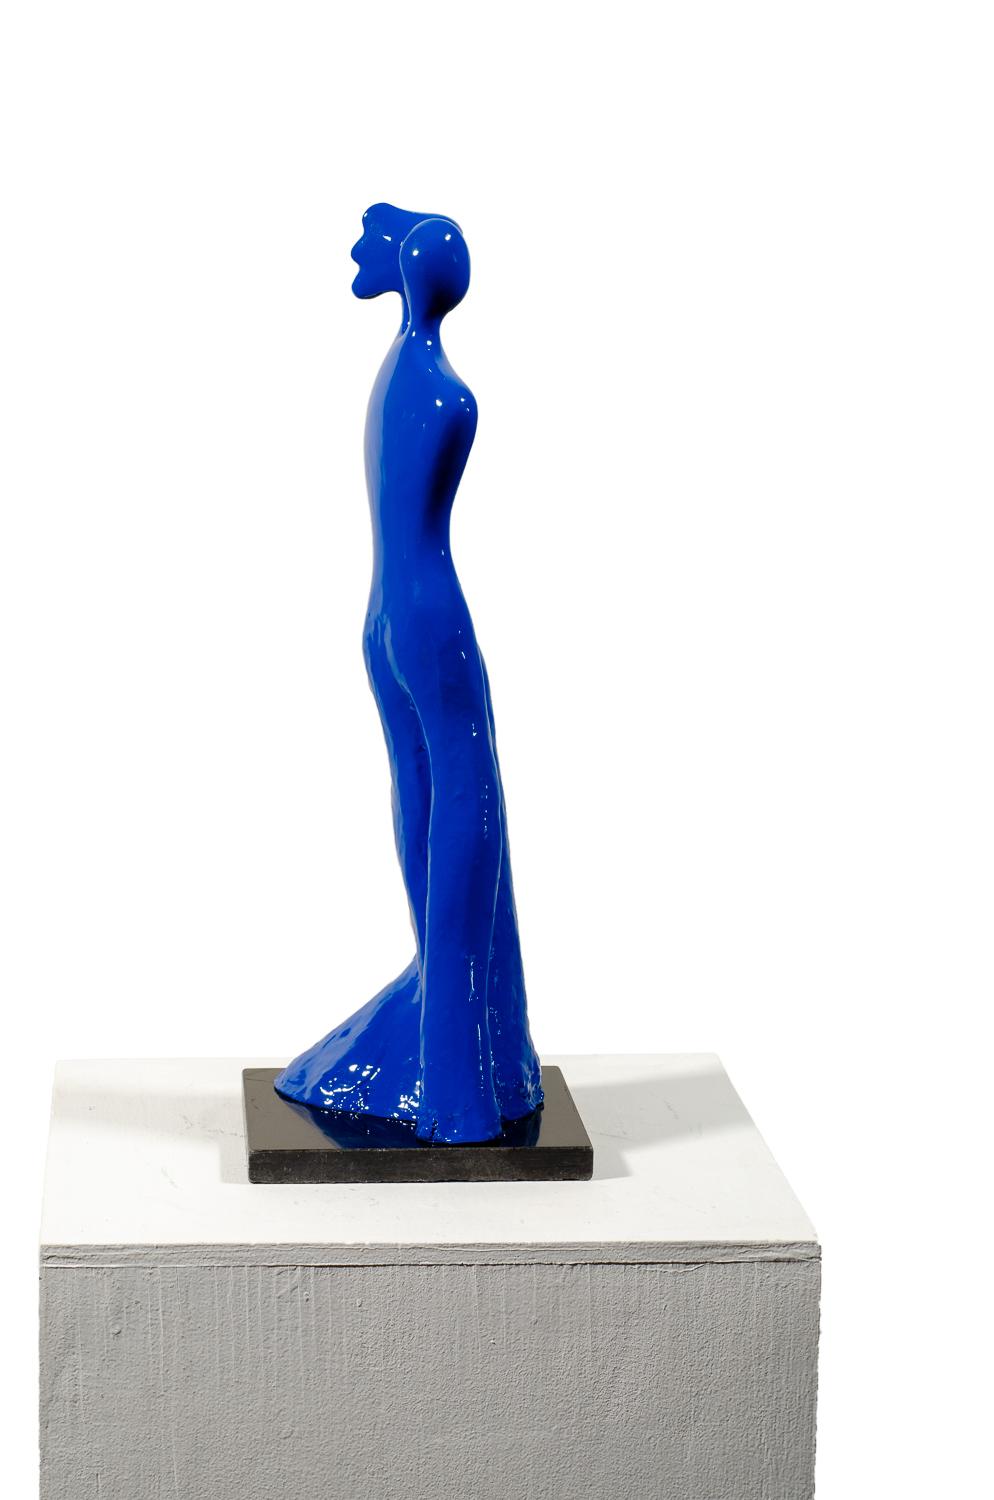 Soul Mates #1 (in blue) When in love, their souls and bodies fuse into just one. - Contemporary Sculpture by Beatriz Gerenstein